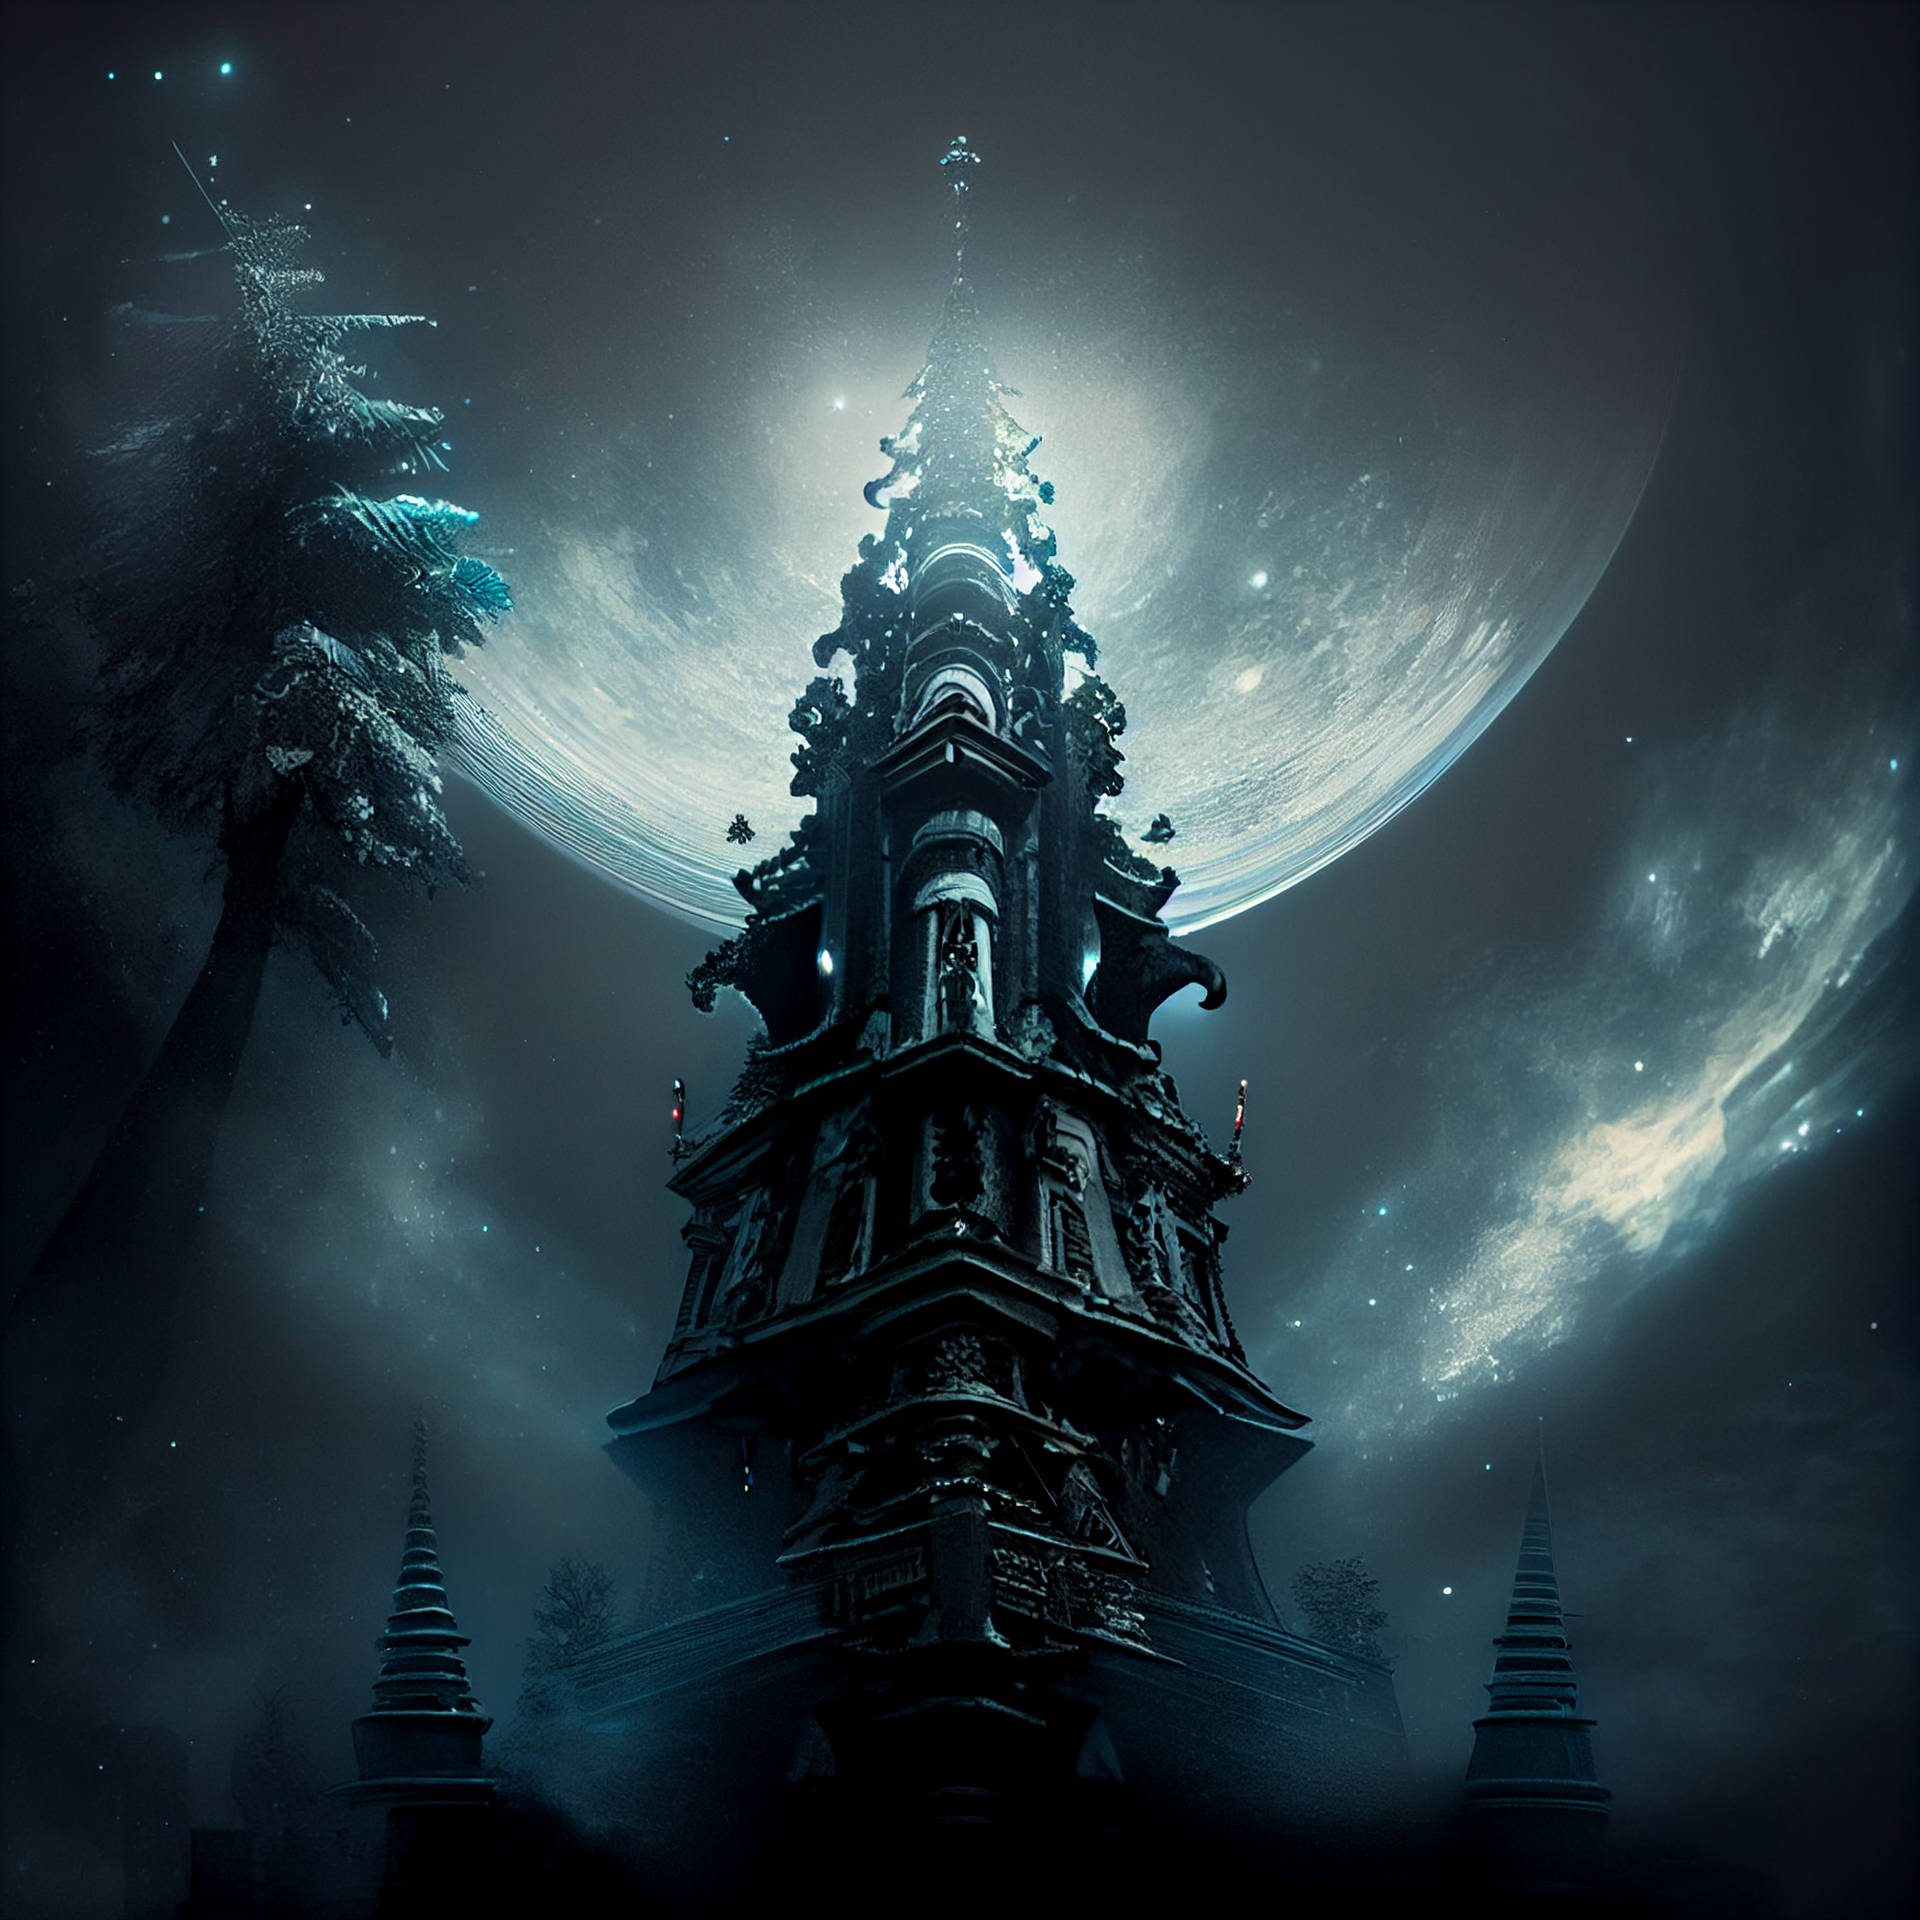 Spooky Tower During A Gothic Christmas Wallpaper